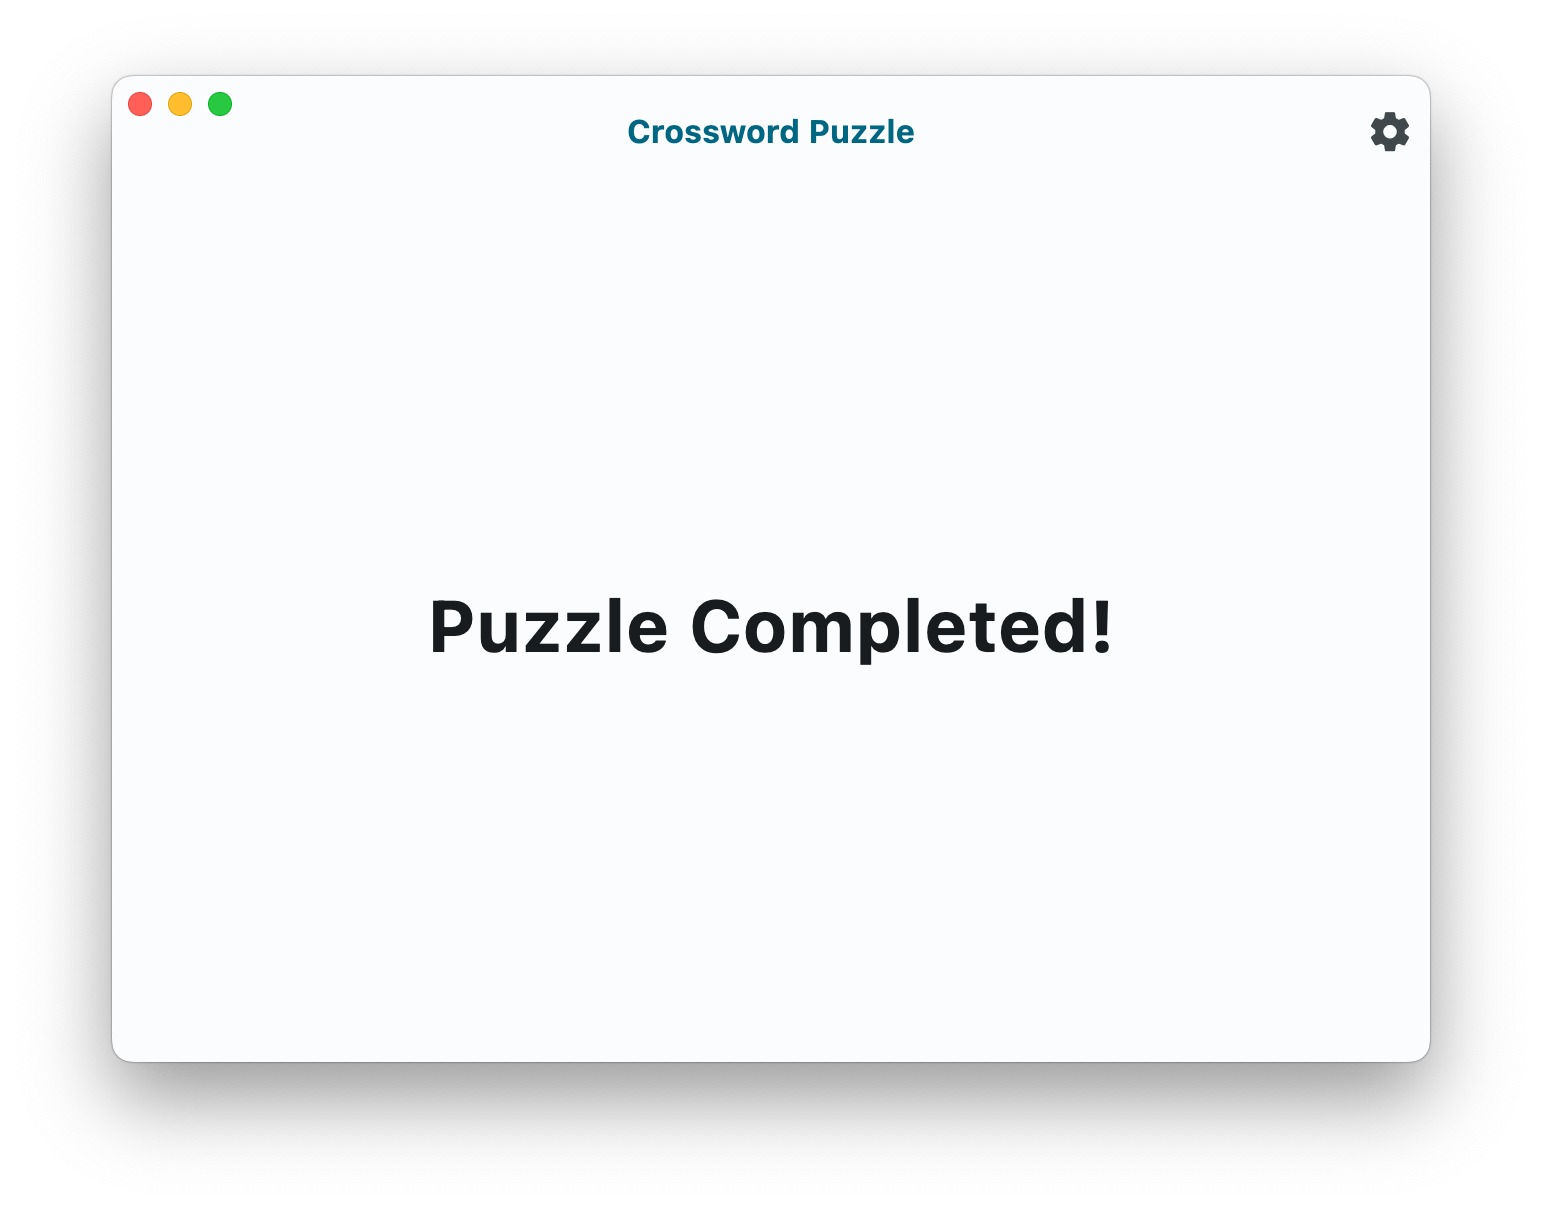 Crossword Puzzle app window showing the text 'Puzzle completed!'